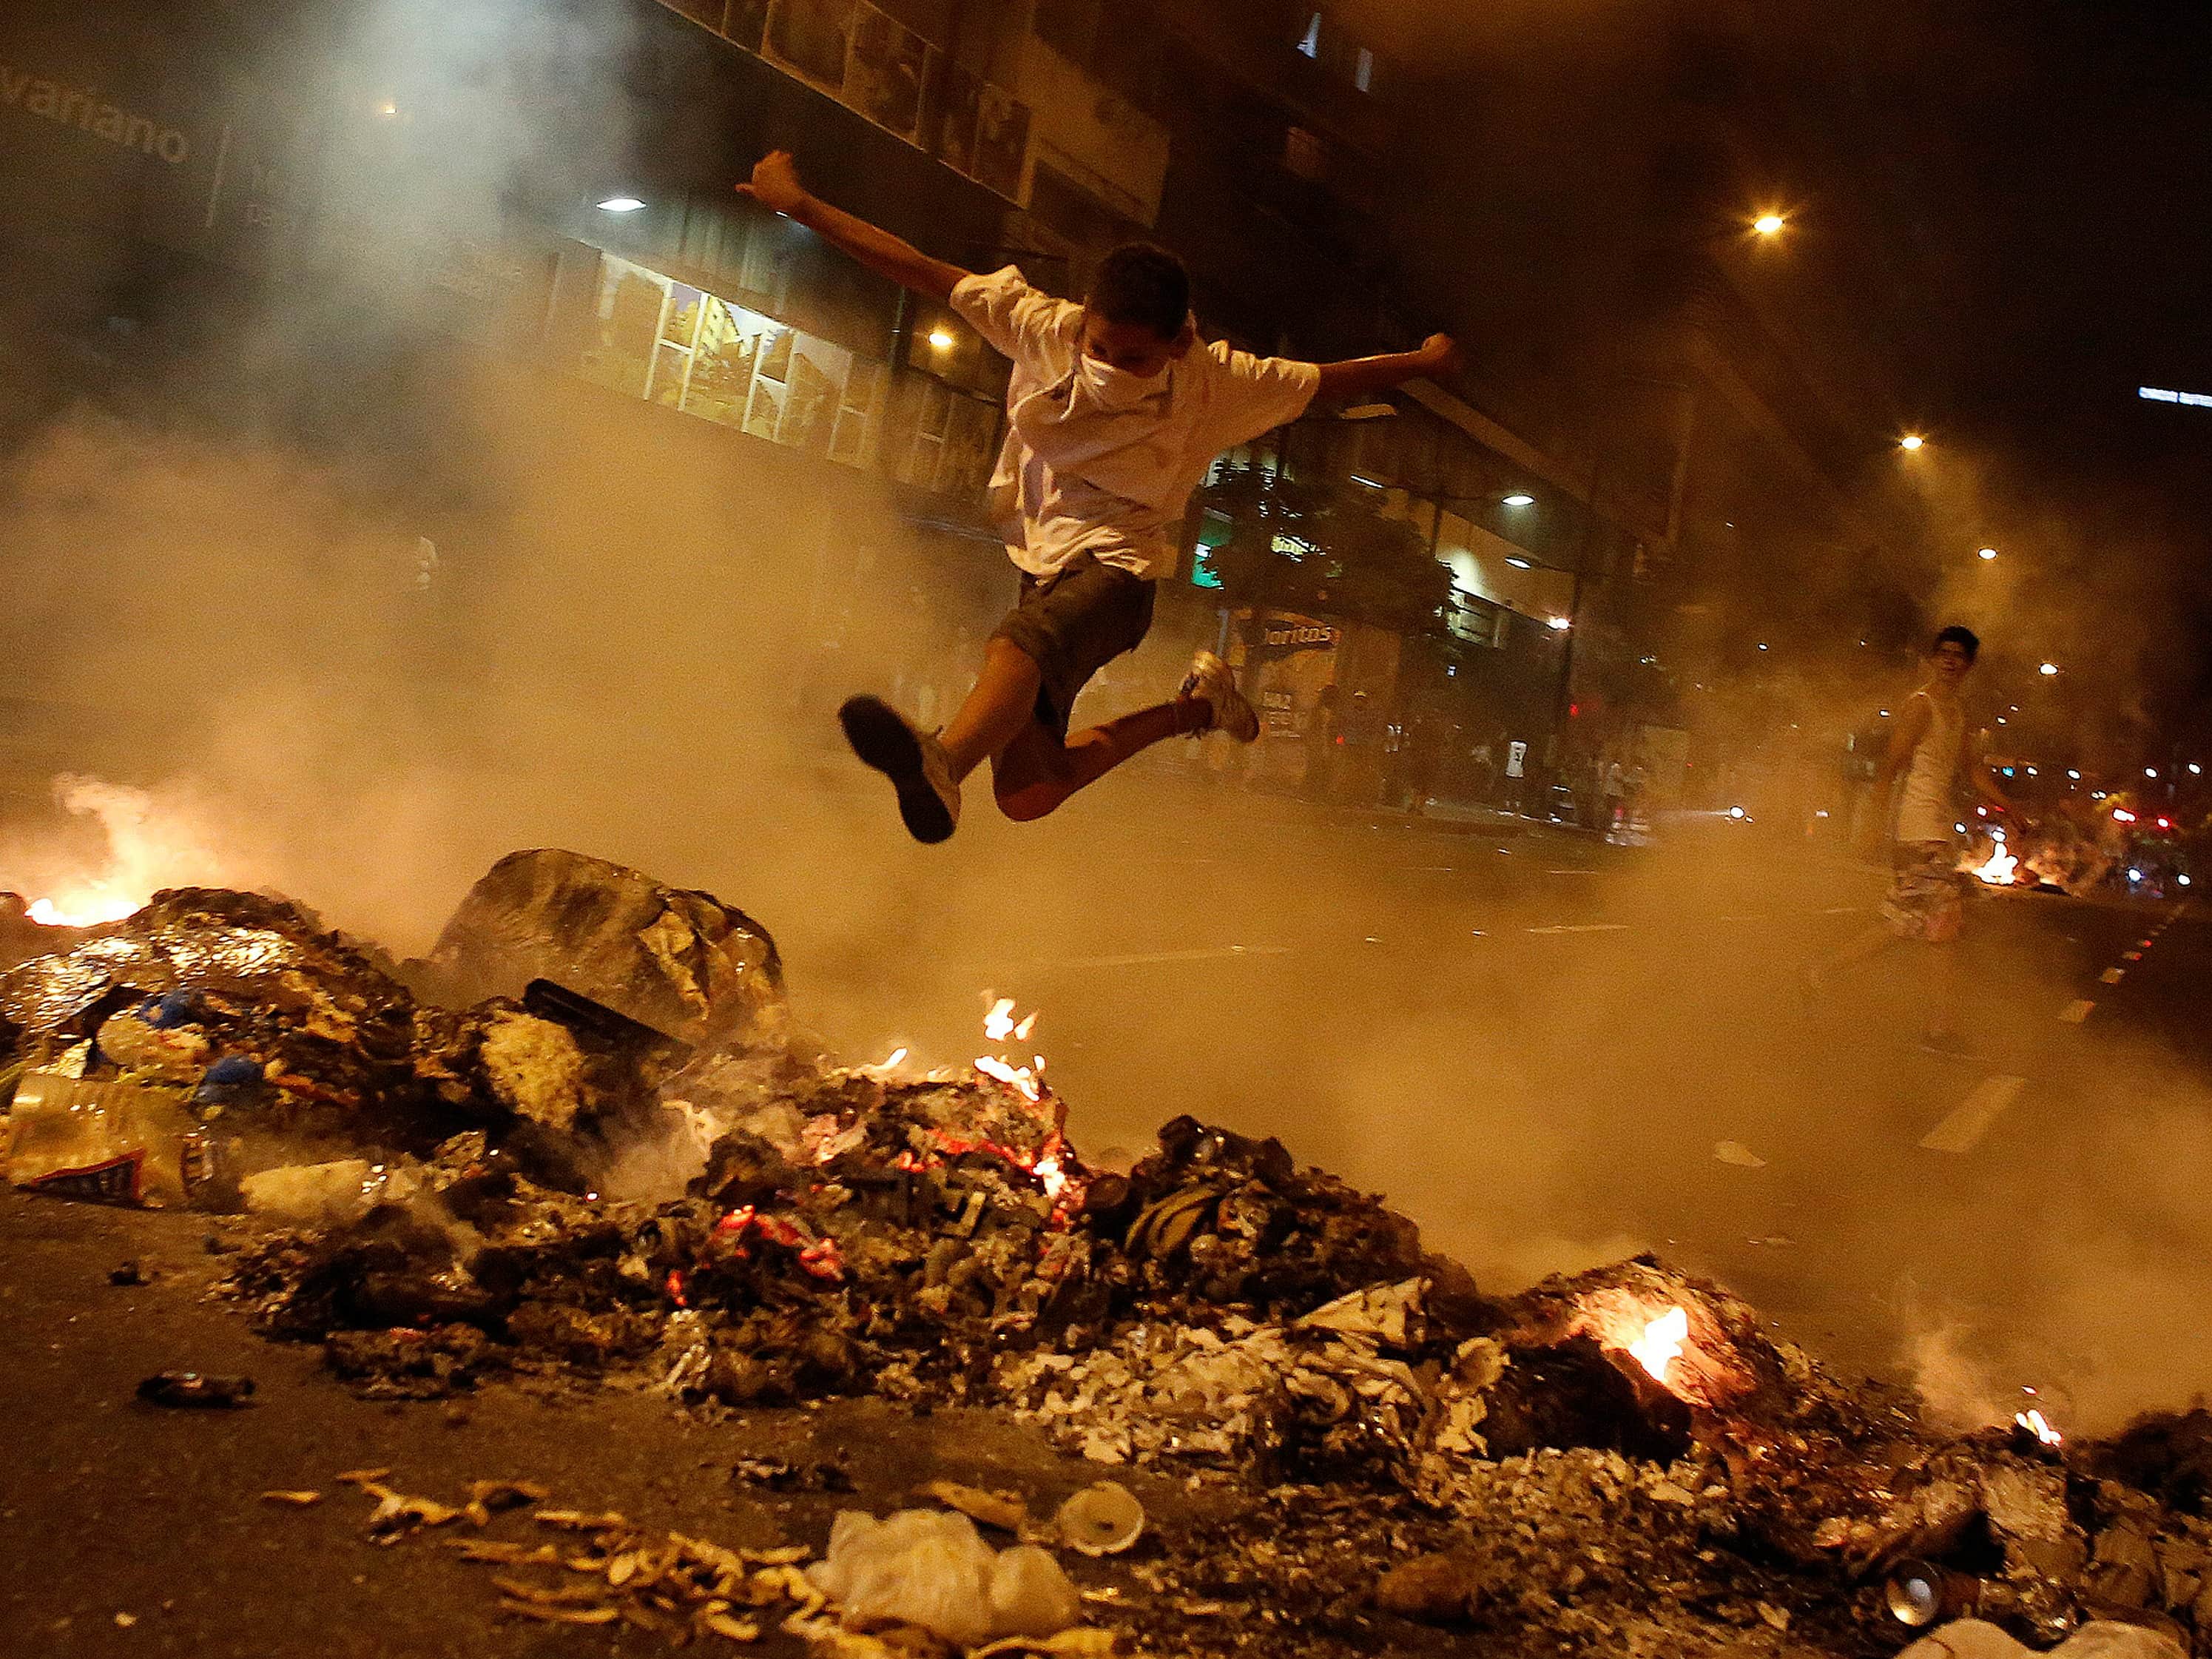 A boy jumps over a barricade of burning garbage that supporters of opposition leader Henrique Capriles used to block a street in Caracas, as they demonstrated for a recount of the votes in the presidential election, REUTERS/Tomas Bravo